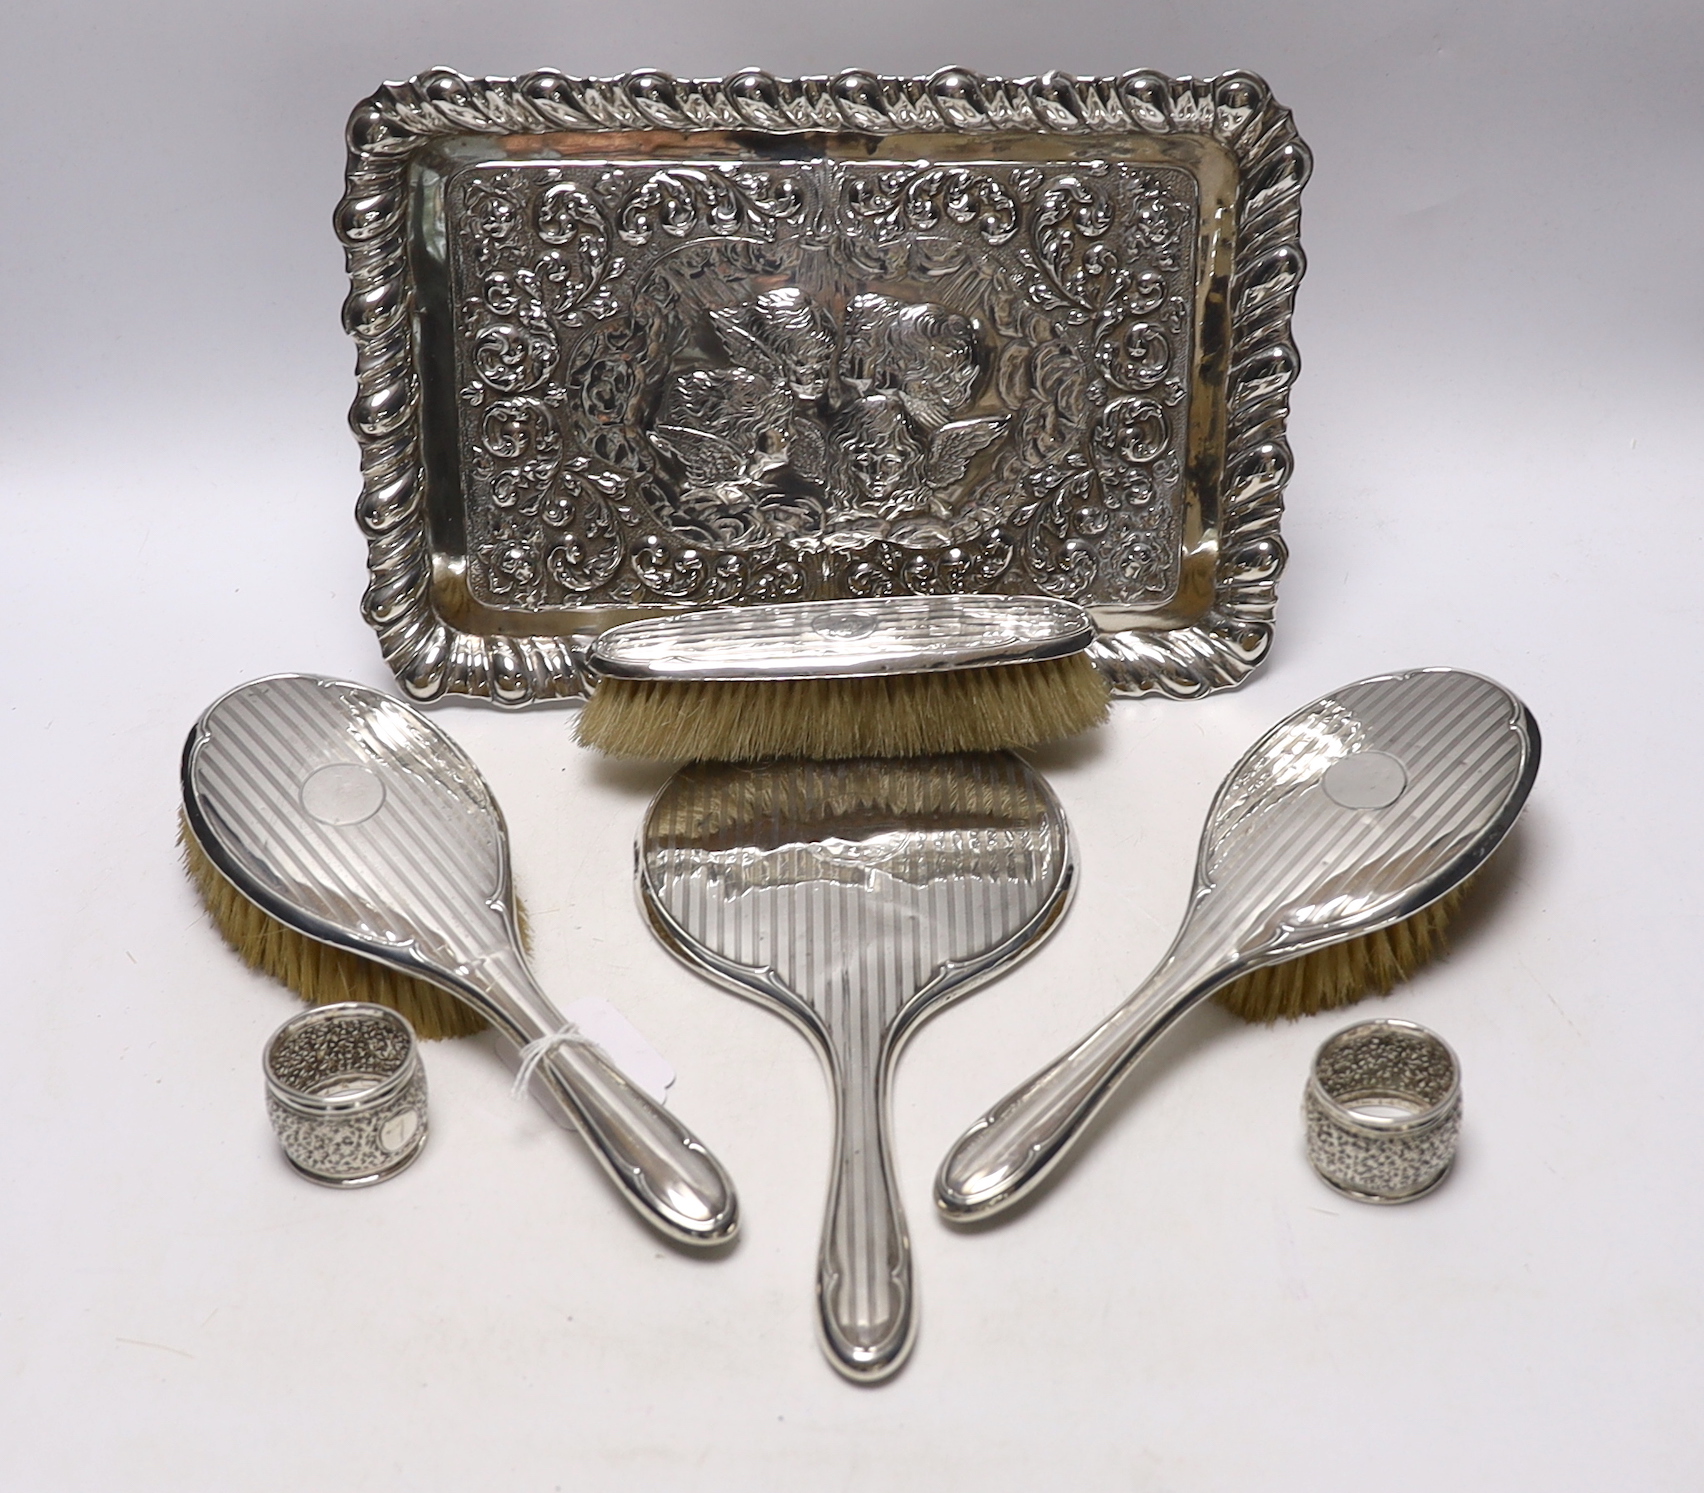 An Edwardian repousse silver dressing table tray, with Reynold's Angels decoration, Birmingham, 1904, 29.7cm, a silver dressing table mirror, two brushes, a clothes brush and two napkin rings.